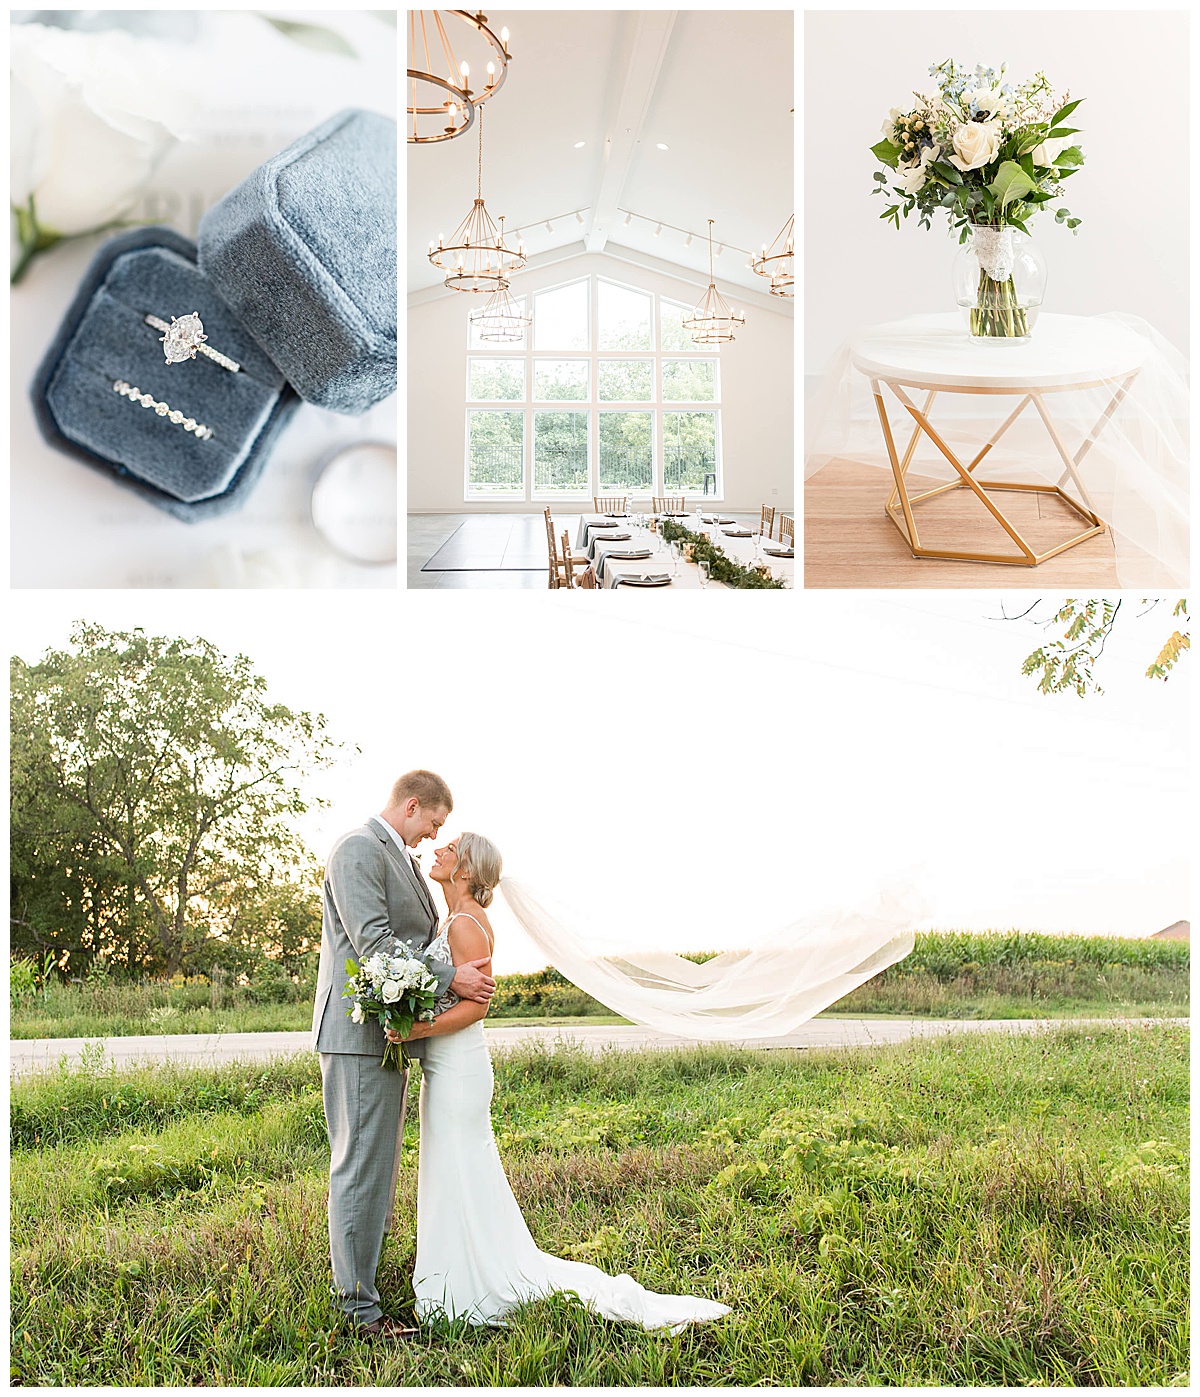 wedding photos from the eloise wedding barn in mount horeb wi